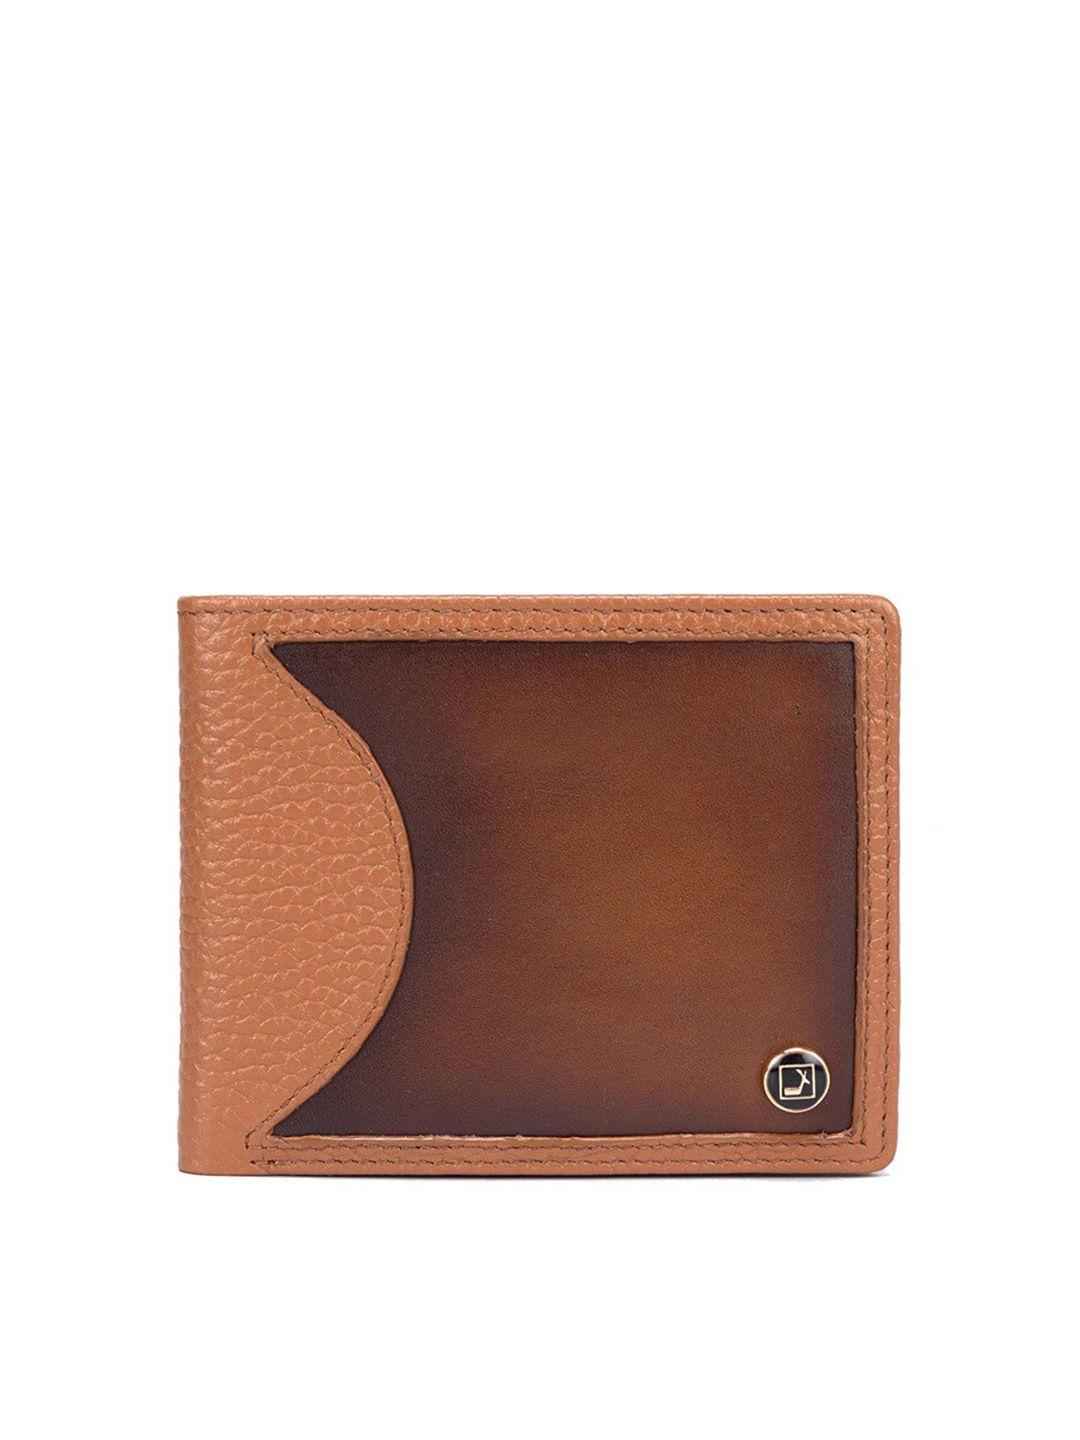 da milano textured leather two fold wallet